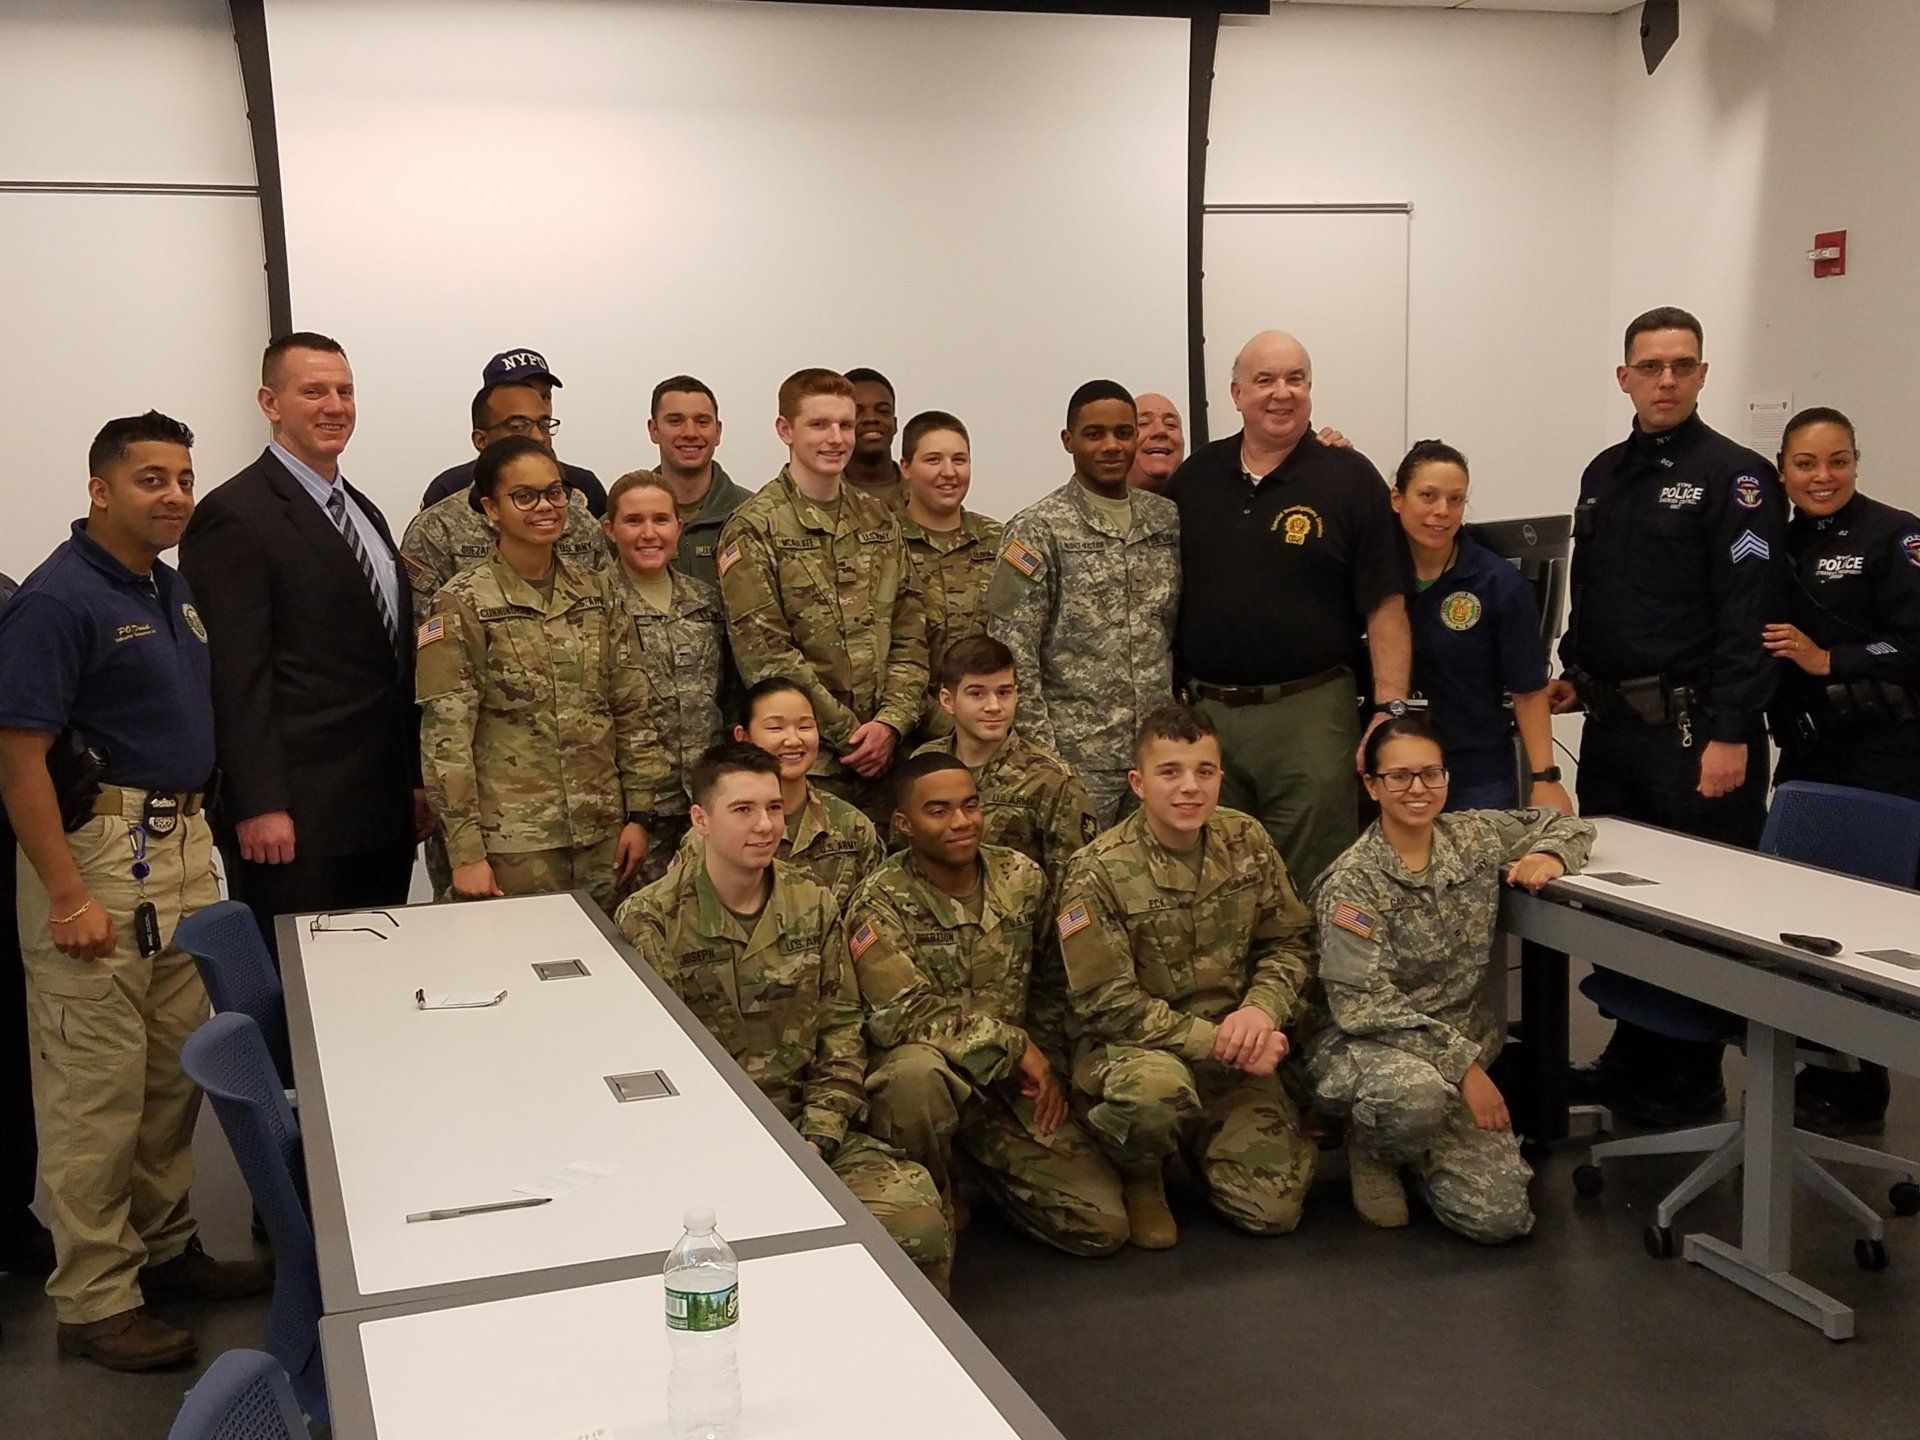 First Responder Training — Conducting Course in Manhattan, NY